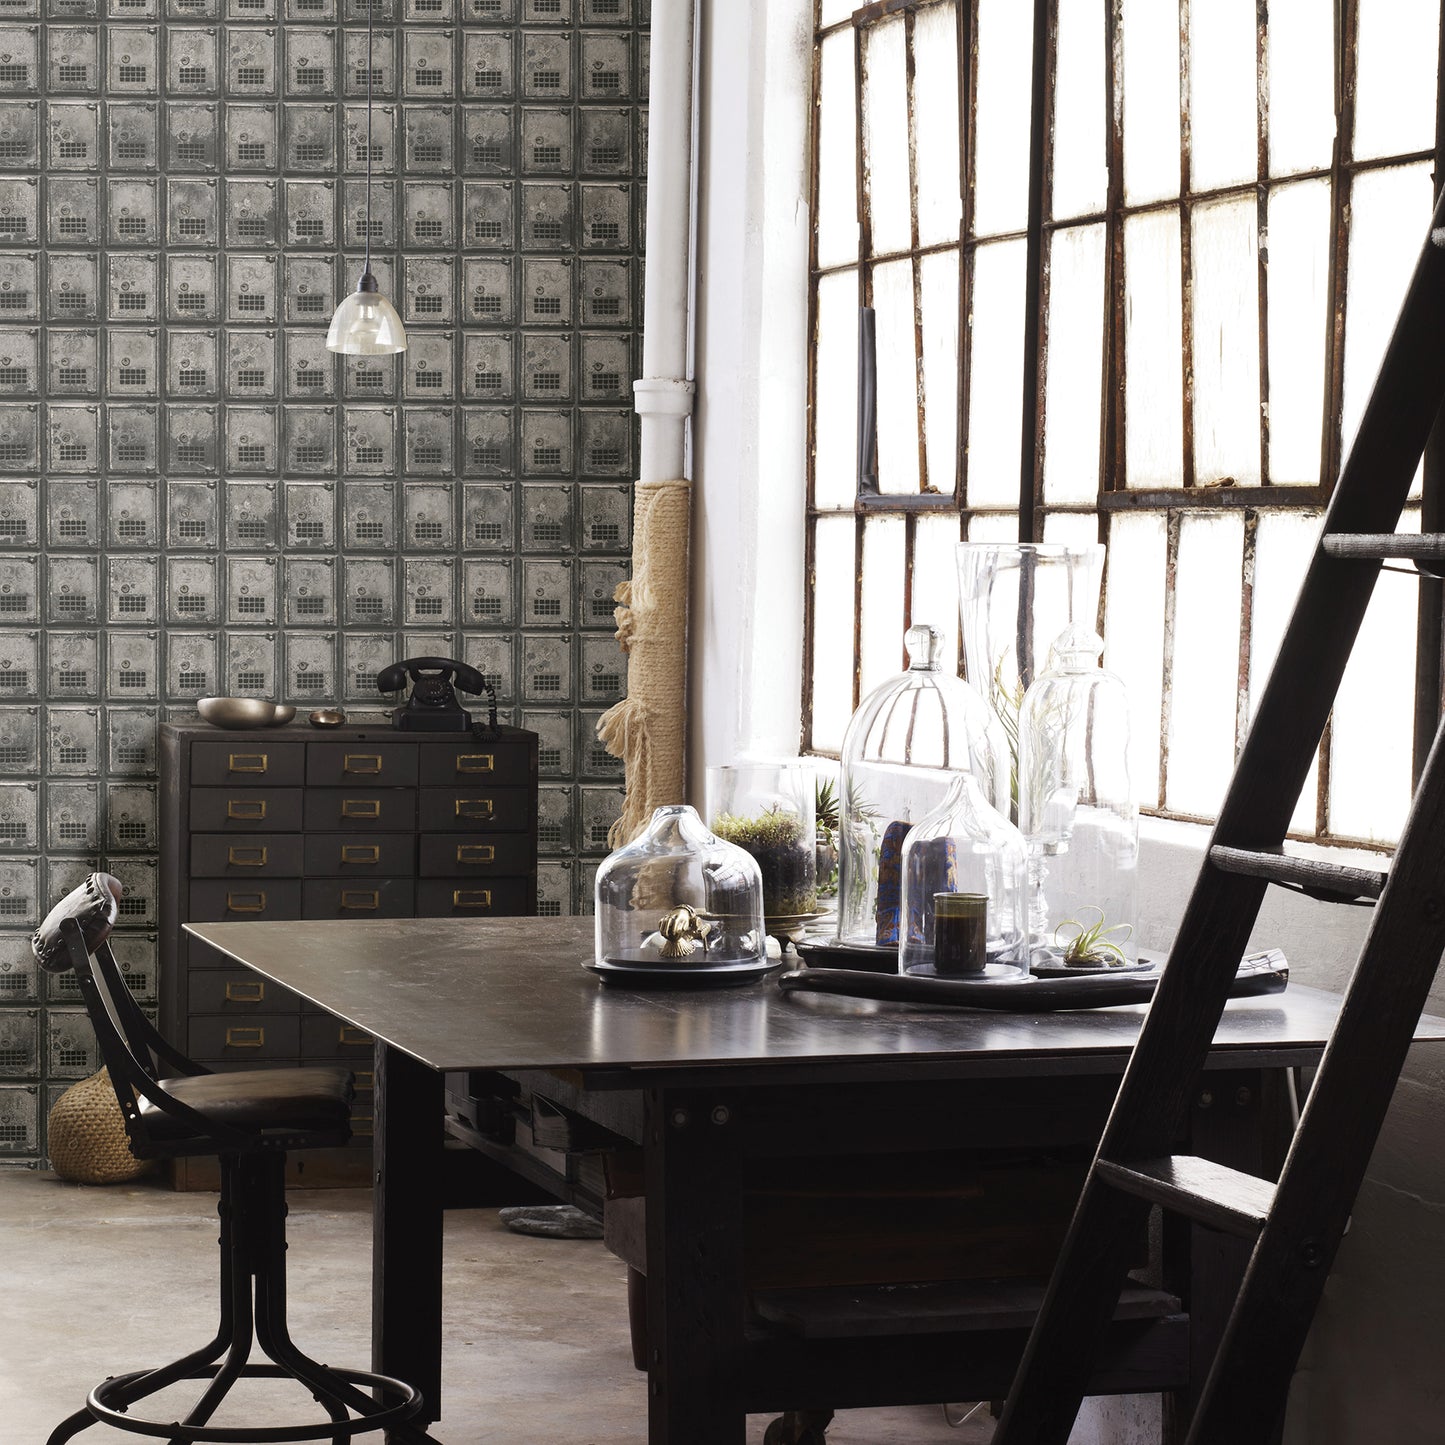 Looking for 2701-22355 Reclaimed Charcoal Trompe L'oeil A-Street Prints Wallpaper